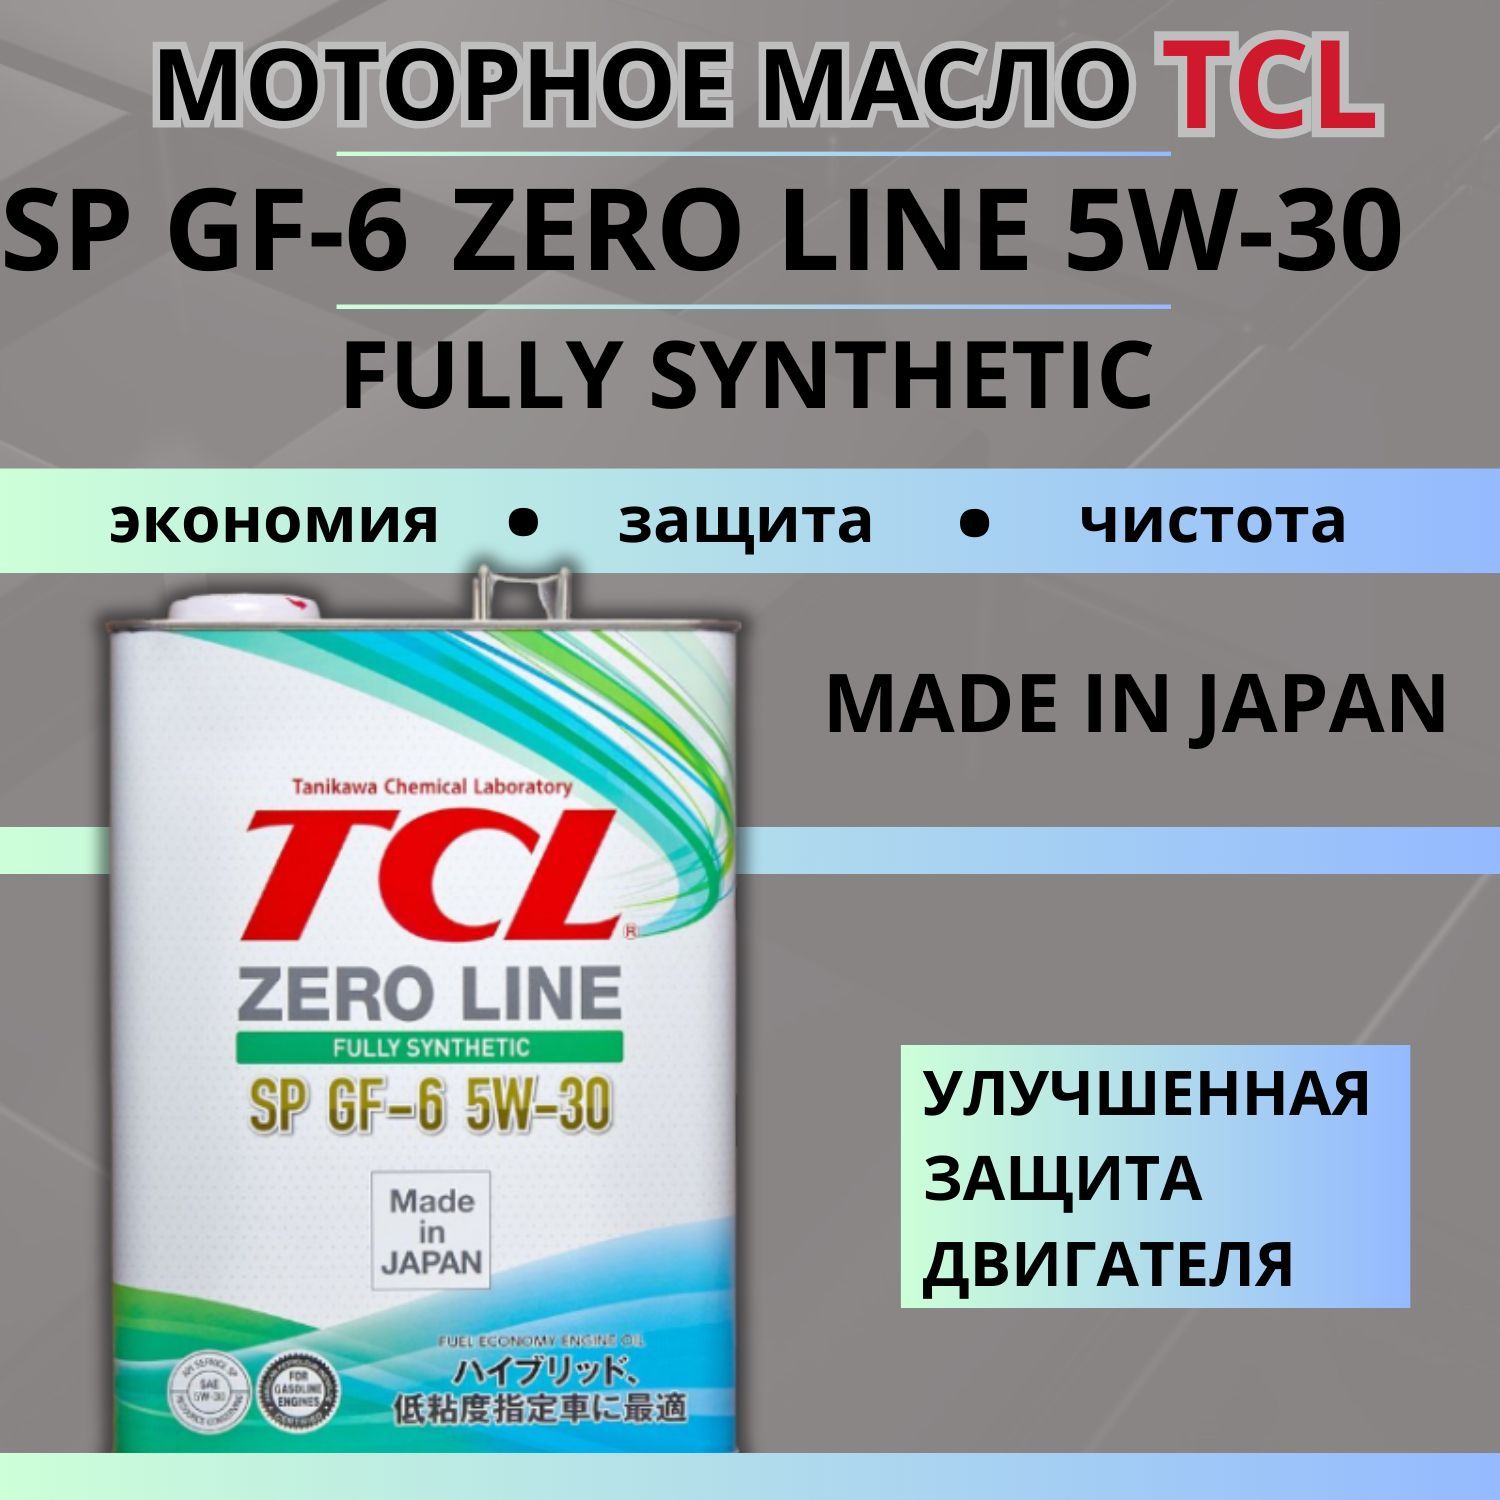 Моторное масло tcl 5w30. Моторное масло ТСЛ 0w20. Масло TCL 0w20. TCL масло моторное 0w-20 4л. Моторное масло TCL 0w30.